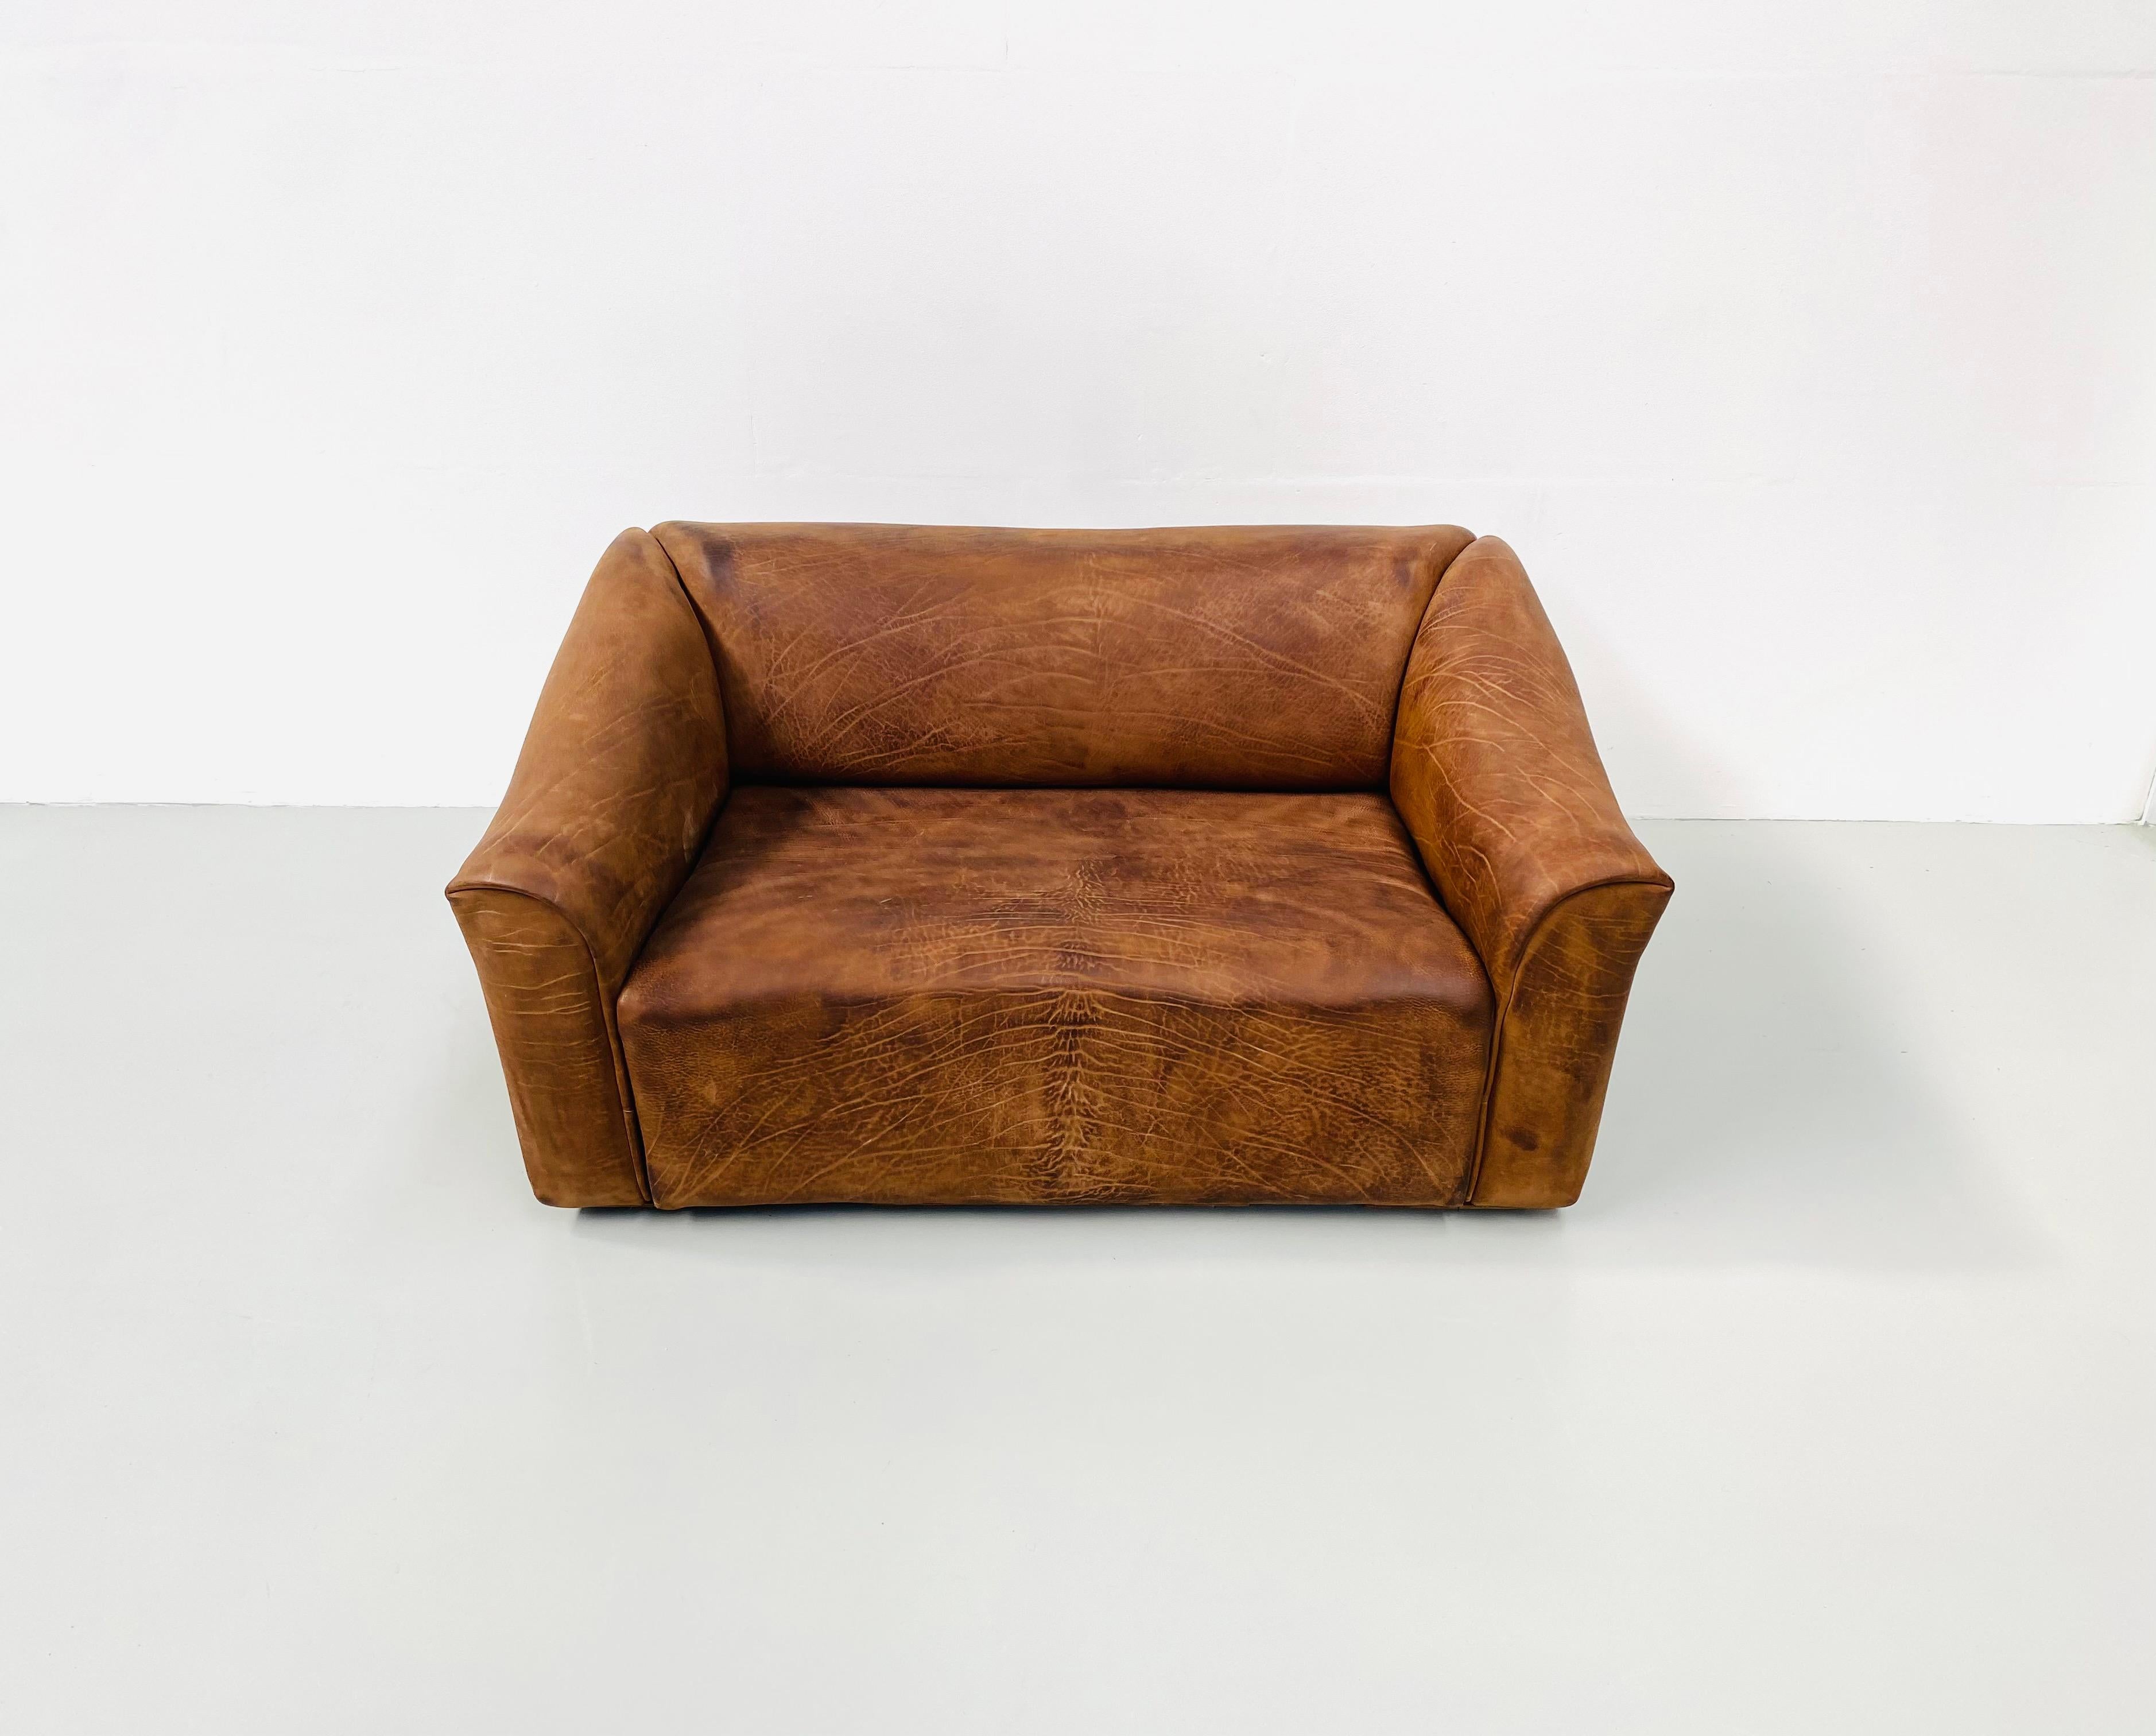 The iconic DS-47 Sofa was designed by the De Sede team in the seventies. This mid century sofa is made of 5mm thick NECK leather recognizable in characteristic fat wrinkles with great patina. The different textures of the NECK Leather and the fat